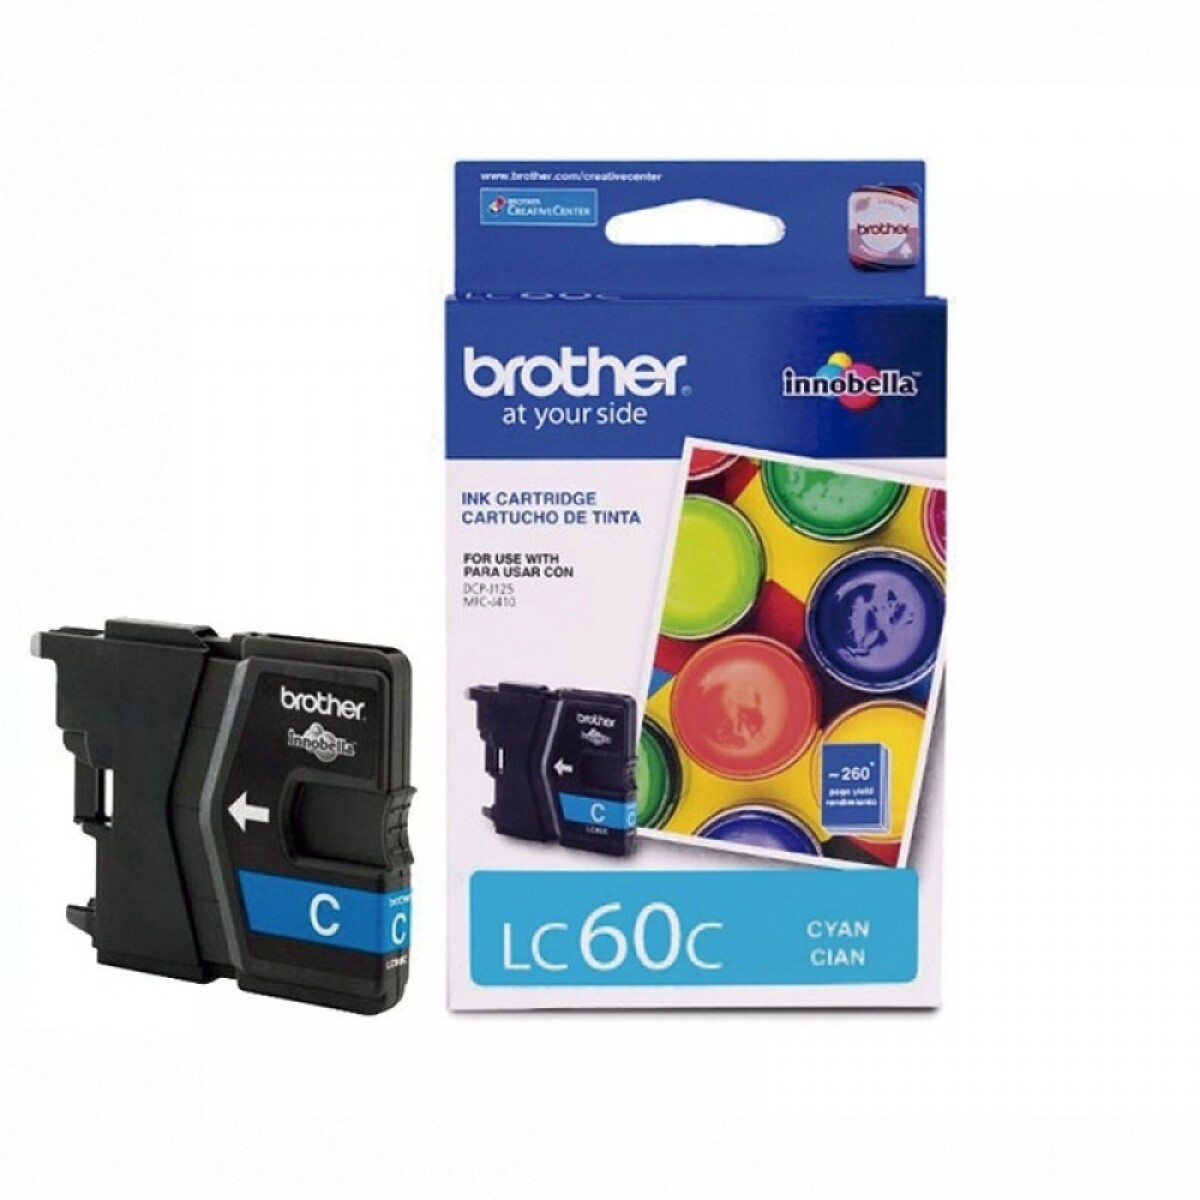 BROTHER LC60C MFC-J410/DCP-140/DCP-J125/MFC240C CYAN - Brother Lc60c Mfc-j410/dcp-140/dcp-j125/mfc240c Cyan 